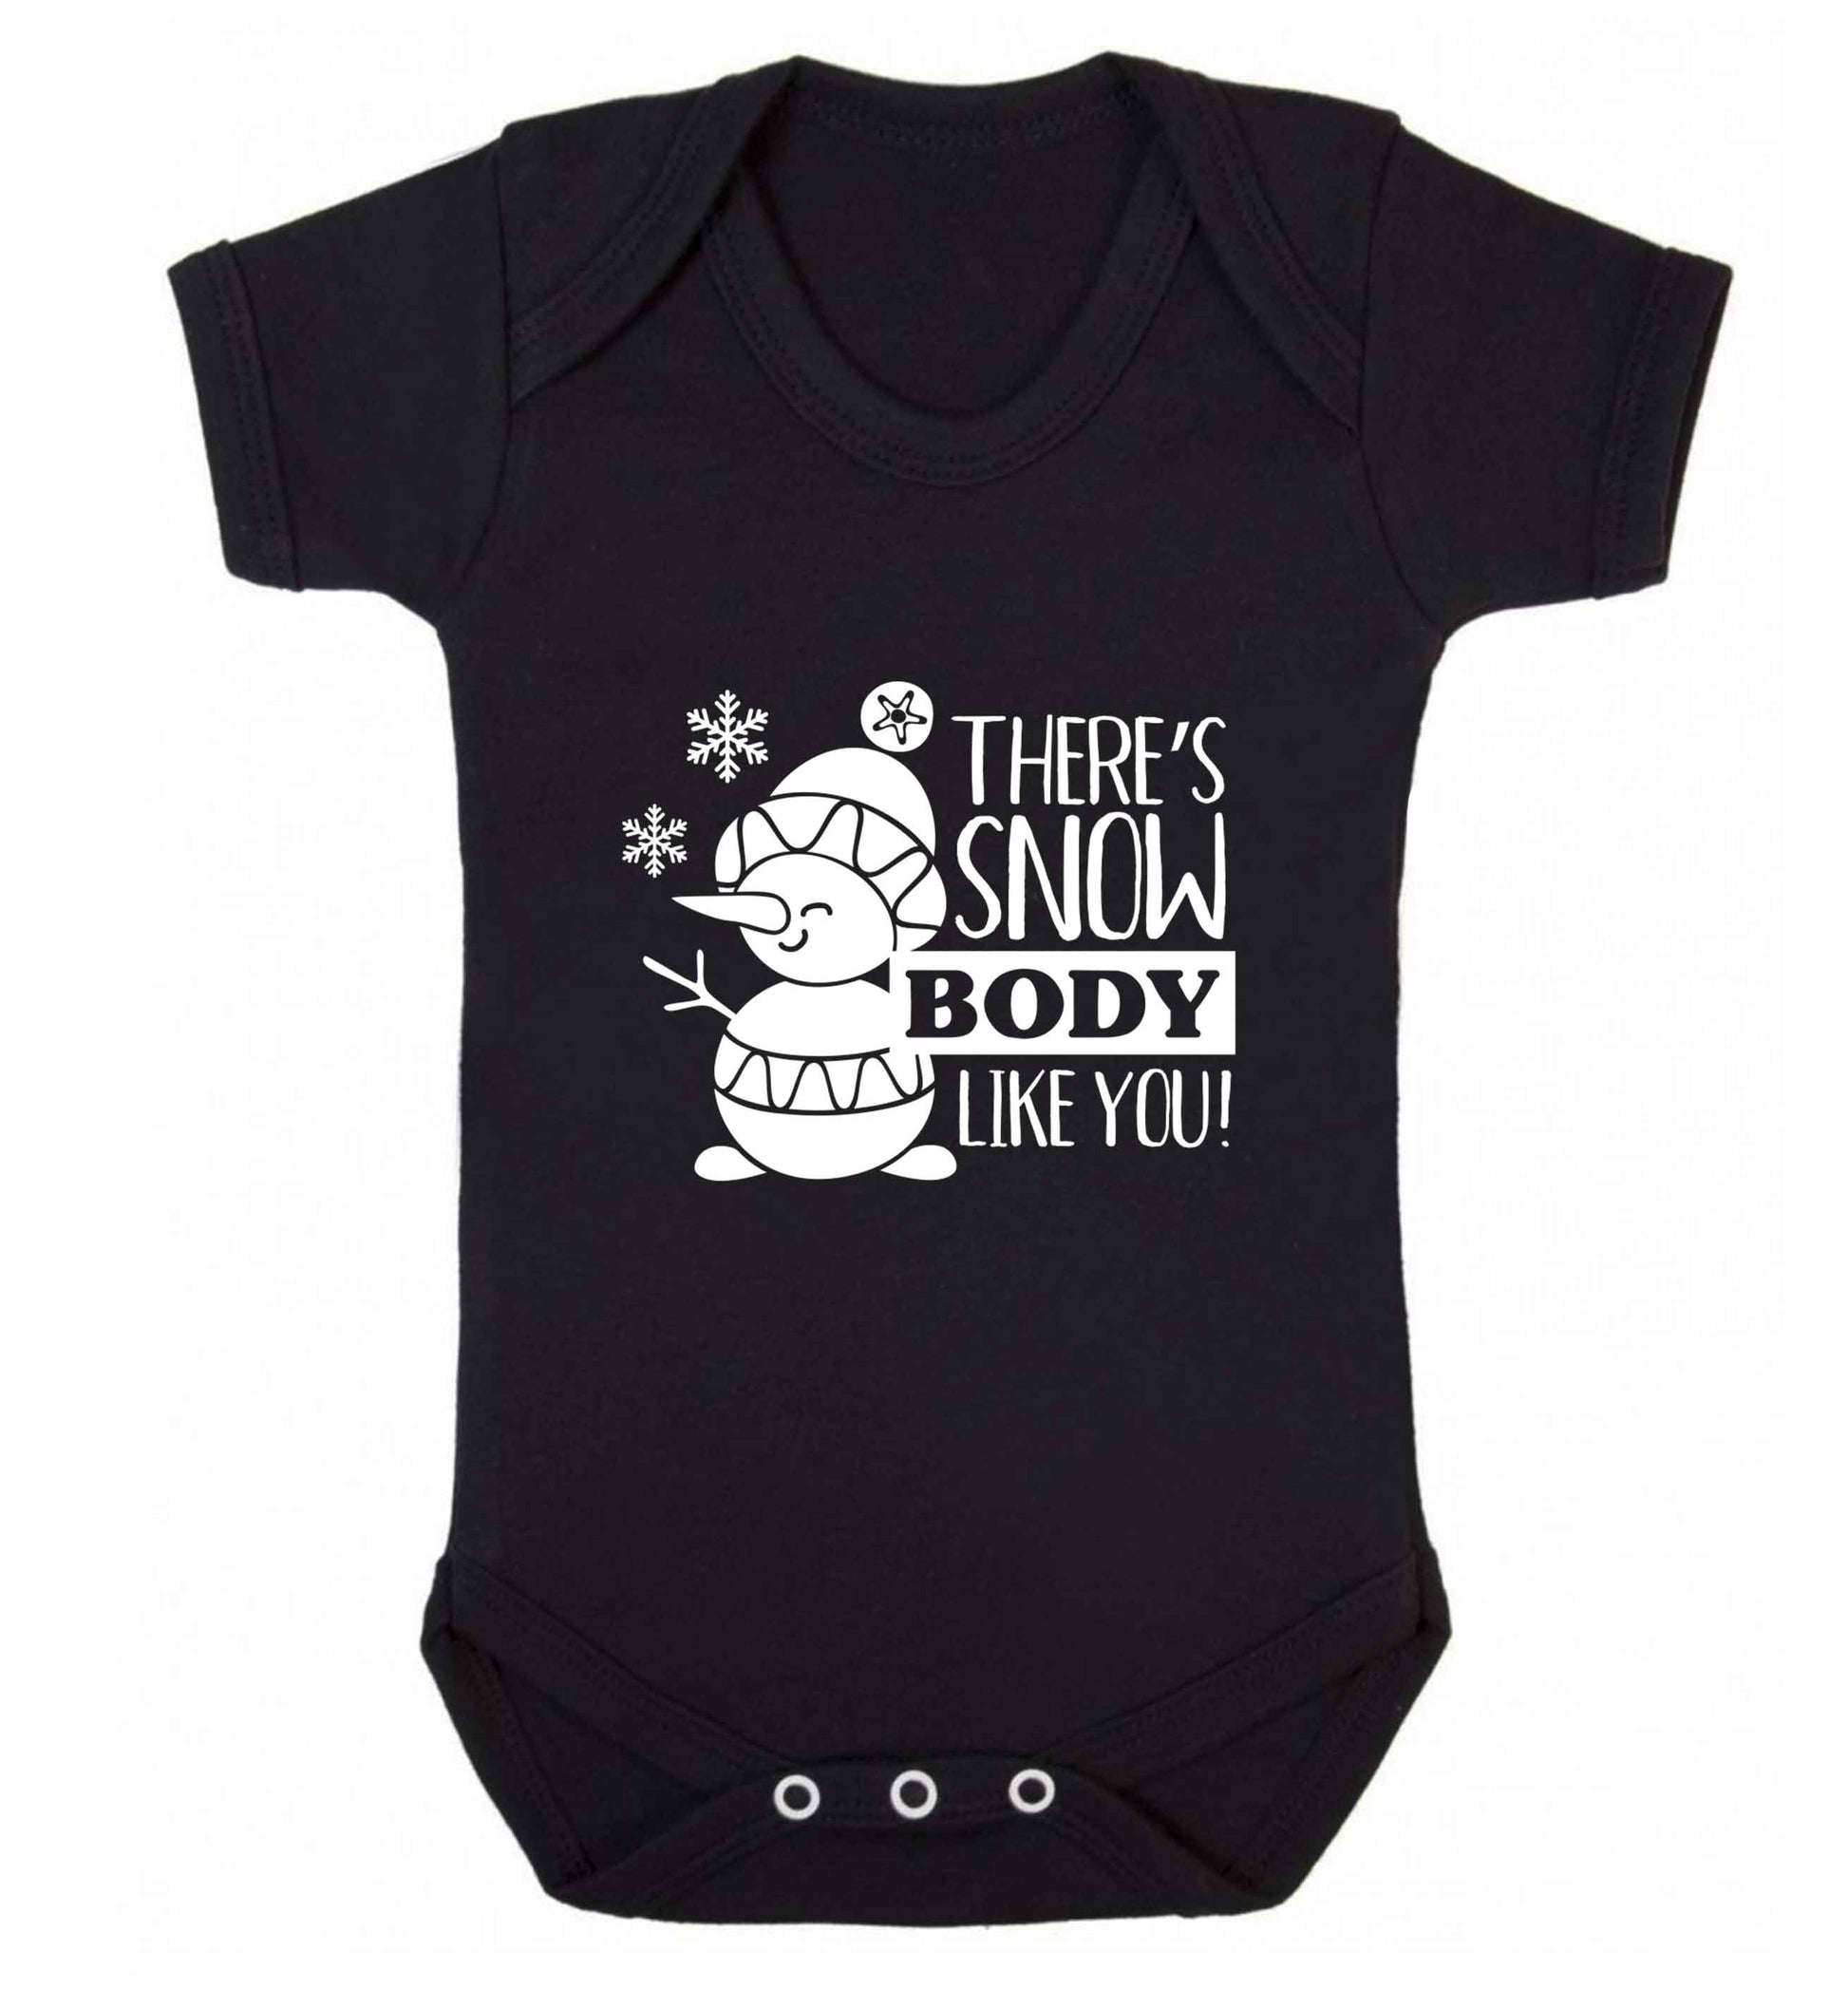 There's snow body like you baby vest black 18-24 months